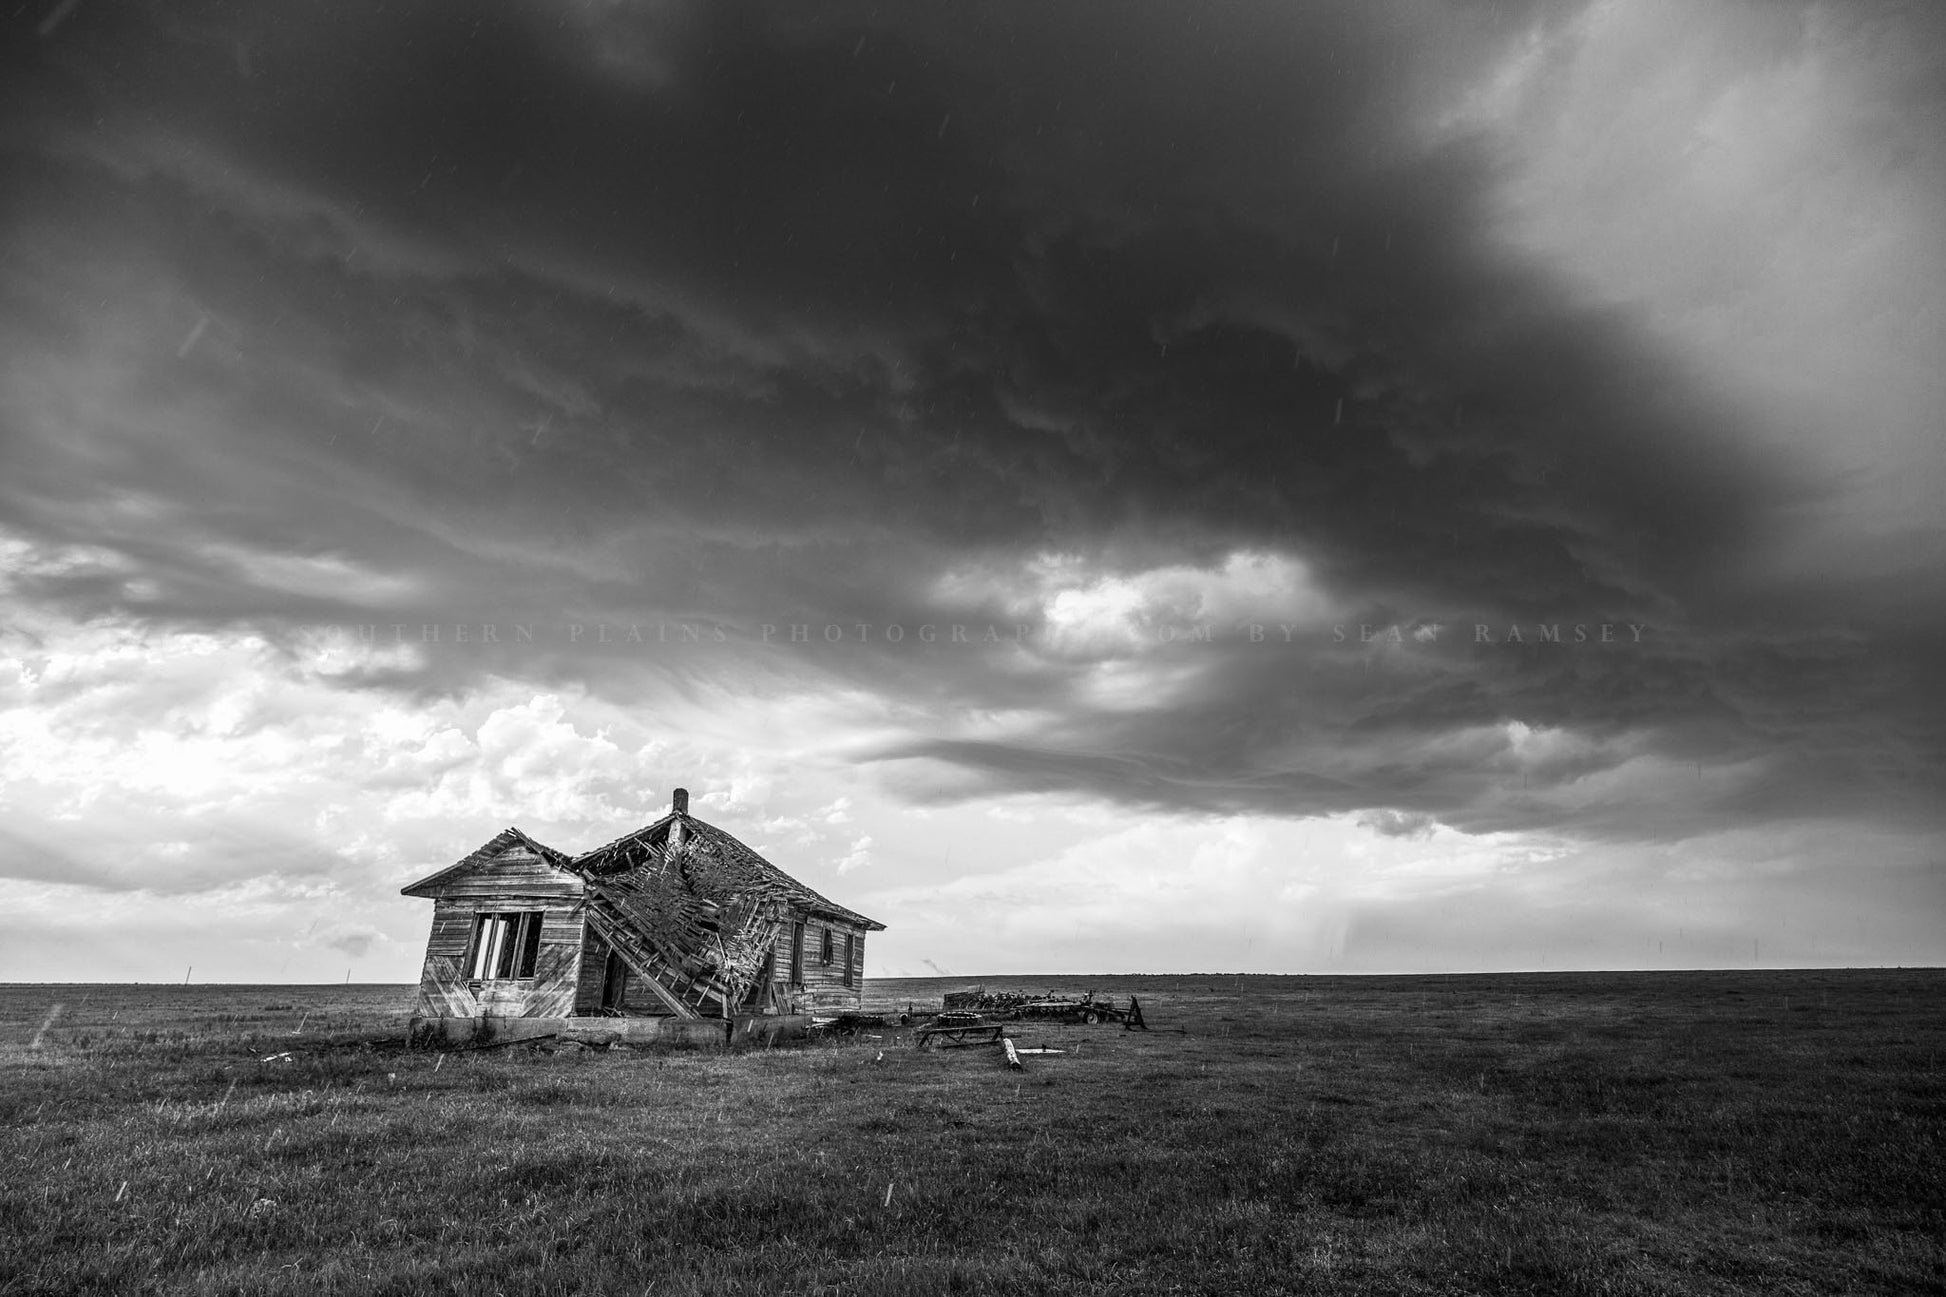 Rustic photography print of an old abandoned house weathers a thunderstorm as raindrops fall on a stormy spring day in Oklahoma in black and white by Sean Ramsey of Southern Plains Photography.